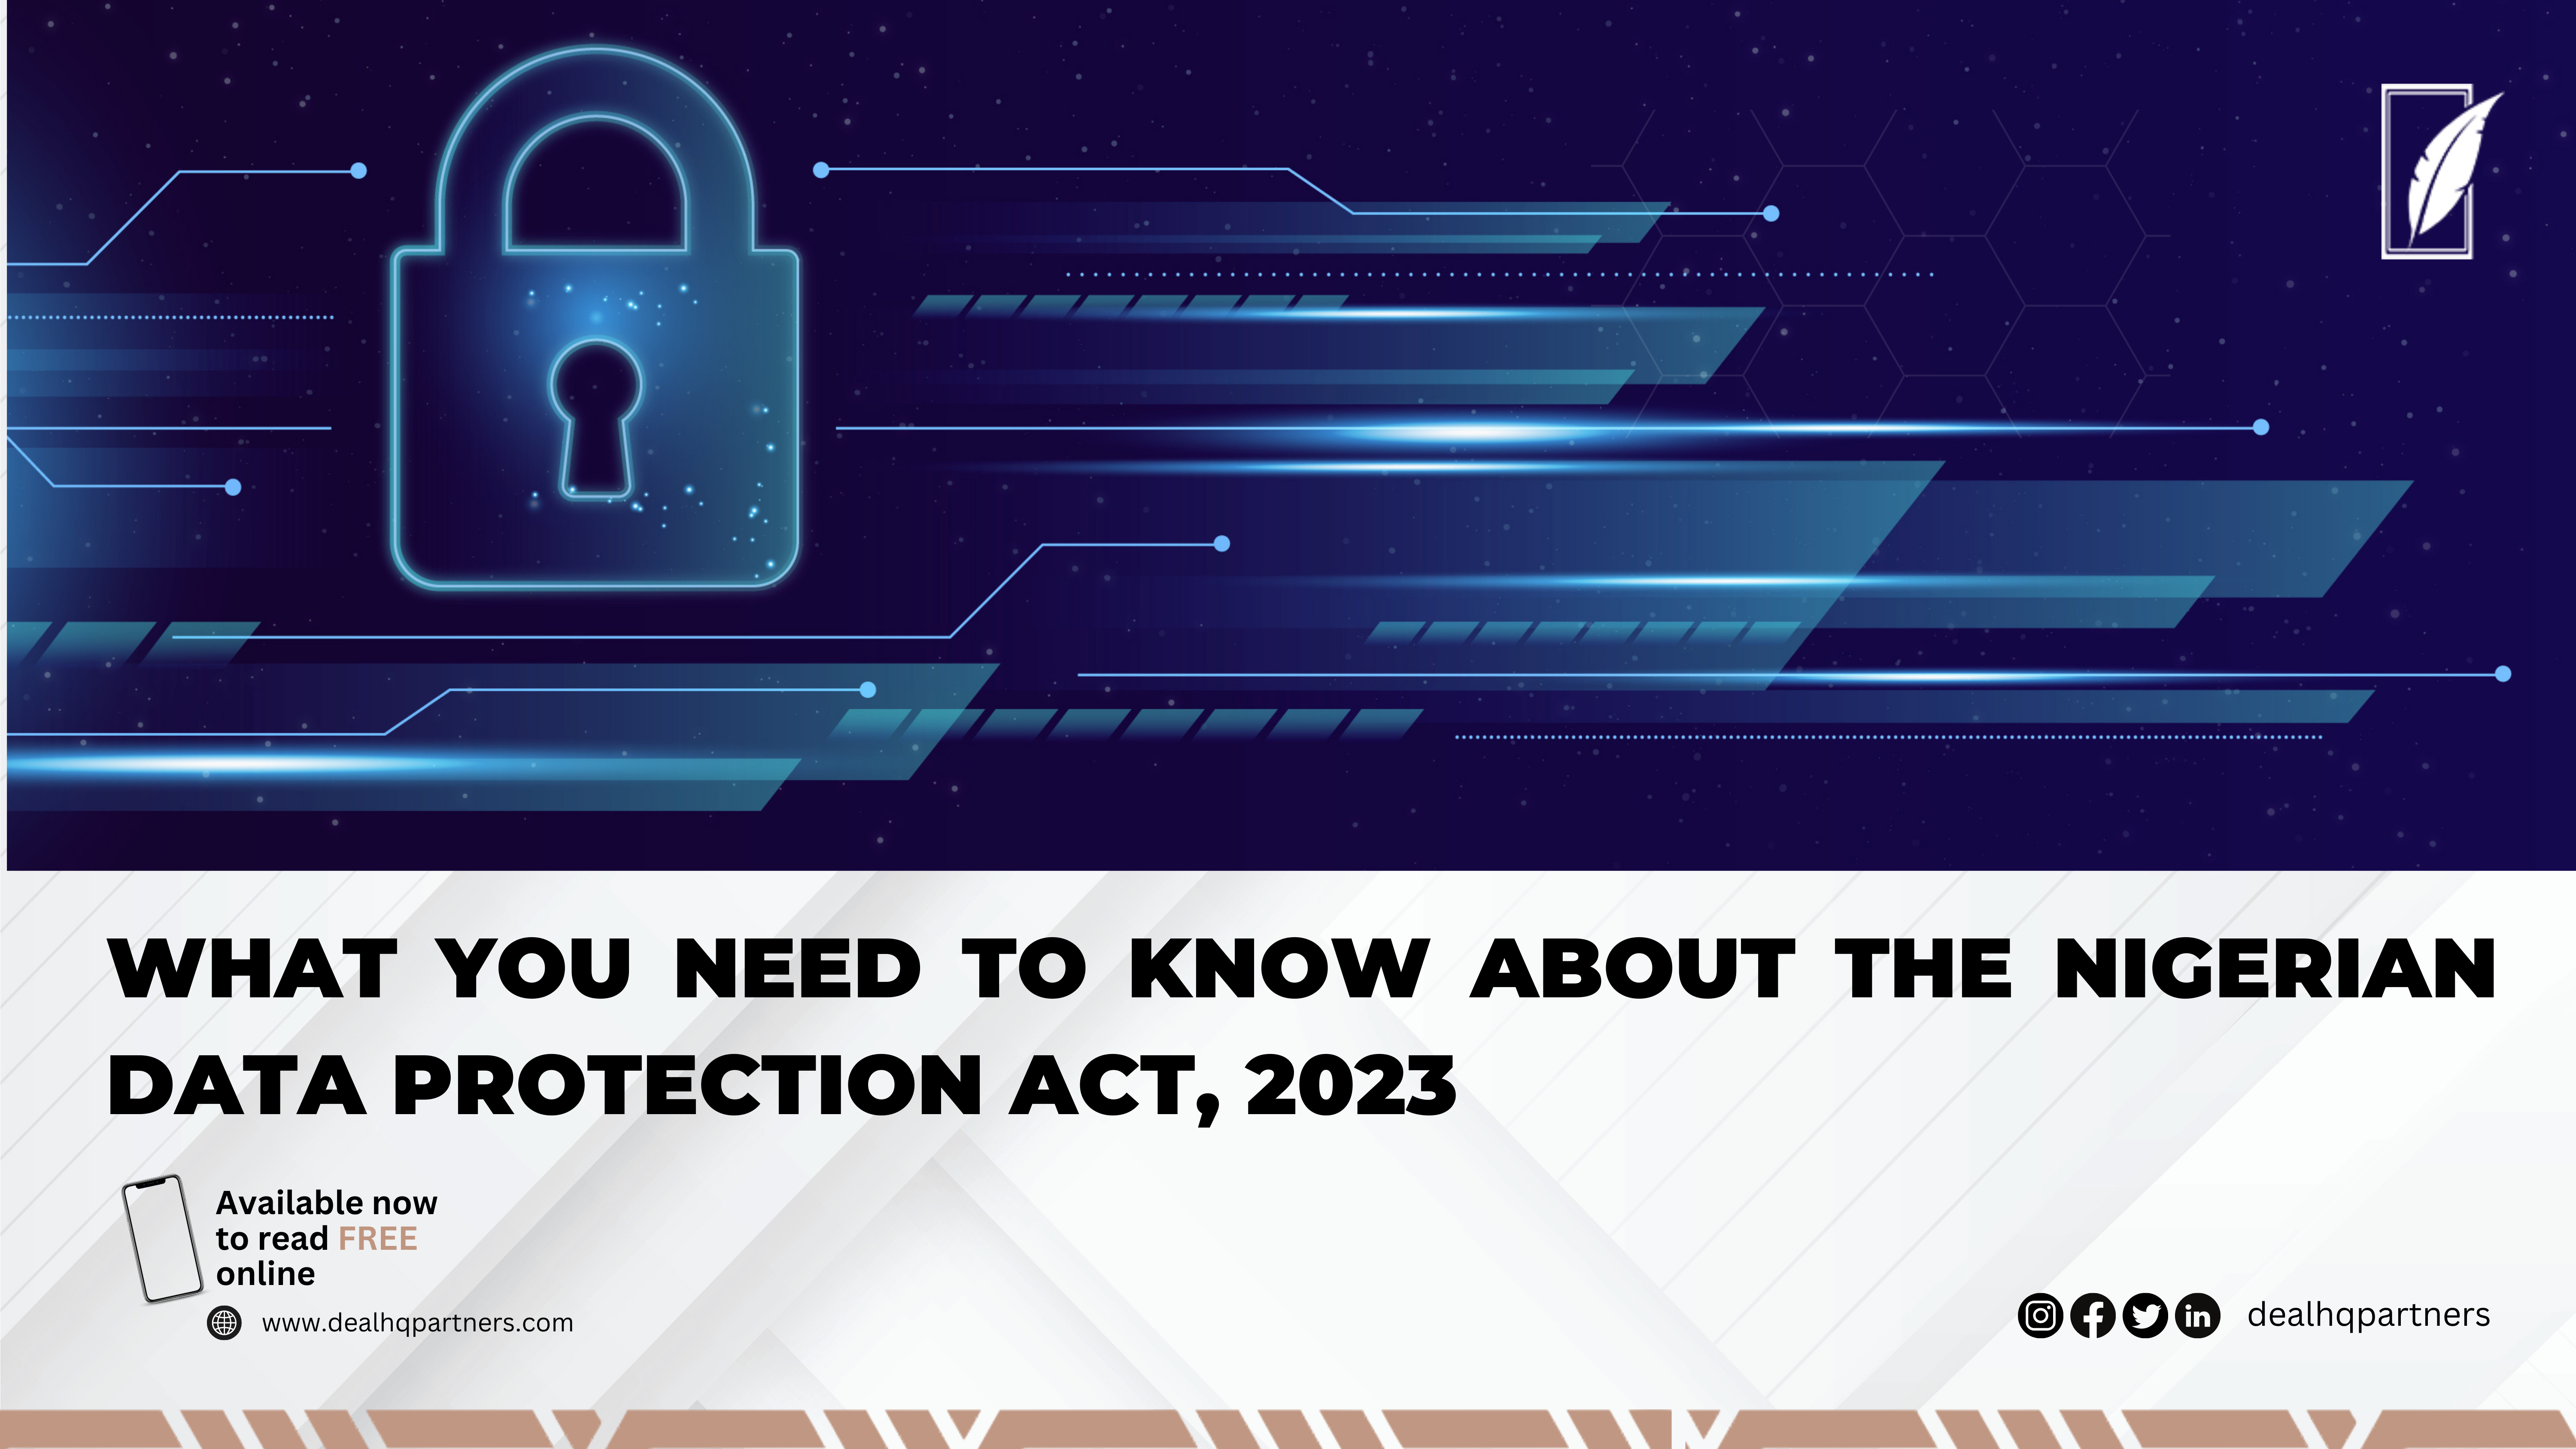 WHAT YOU NEED TO KNOW ABOUT THE NIGERIA DATA PROTECTION ACT, 2023